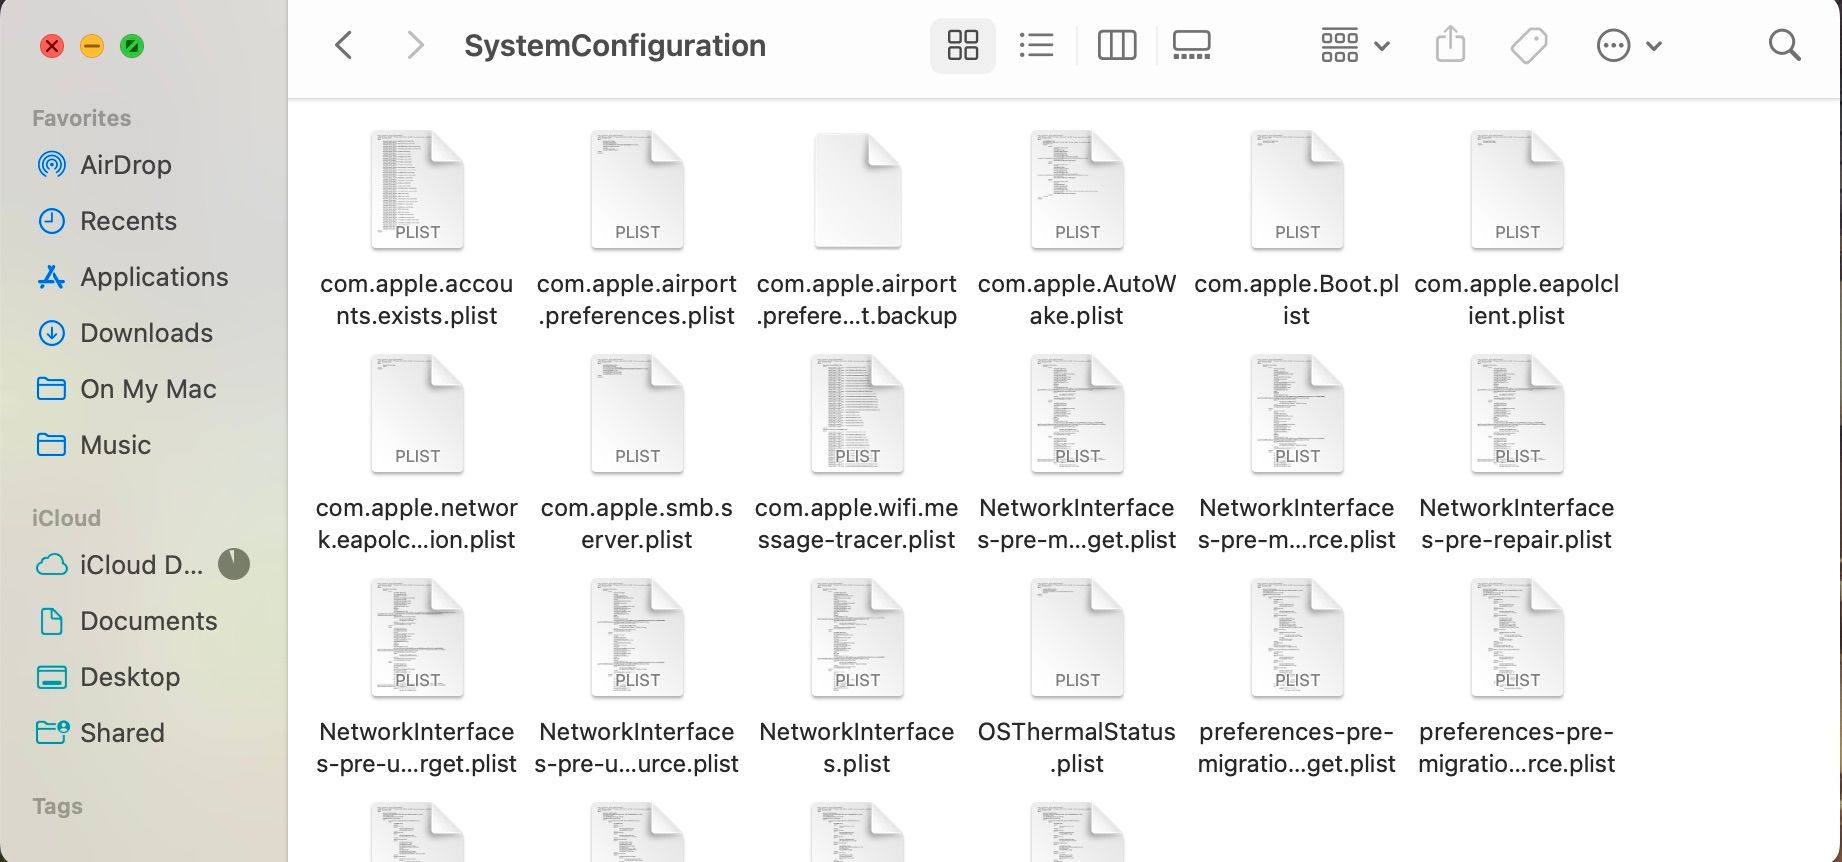 A screenshot of the SystemConfiguration folder in the Finder